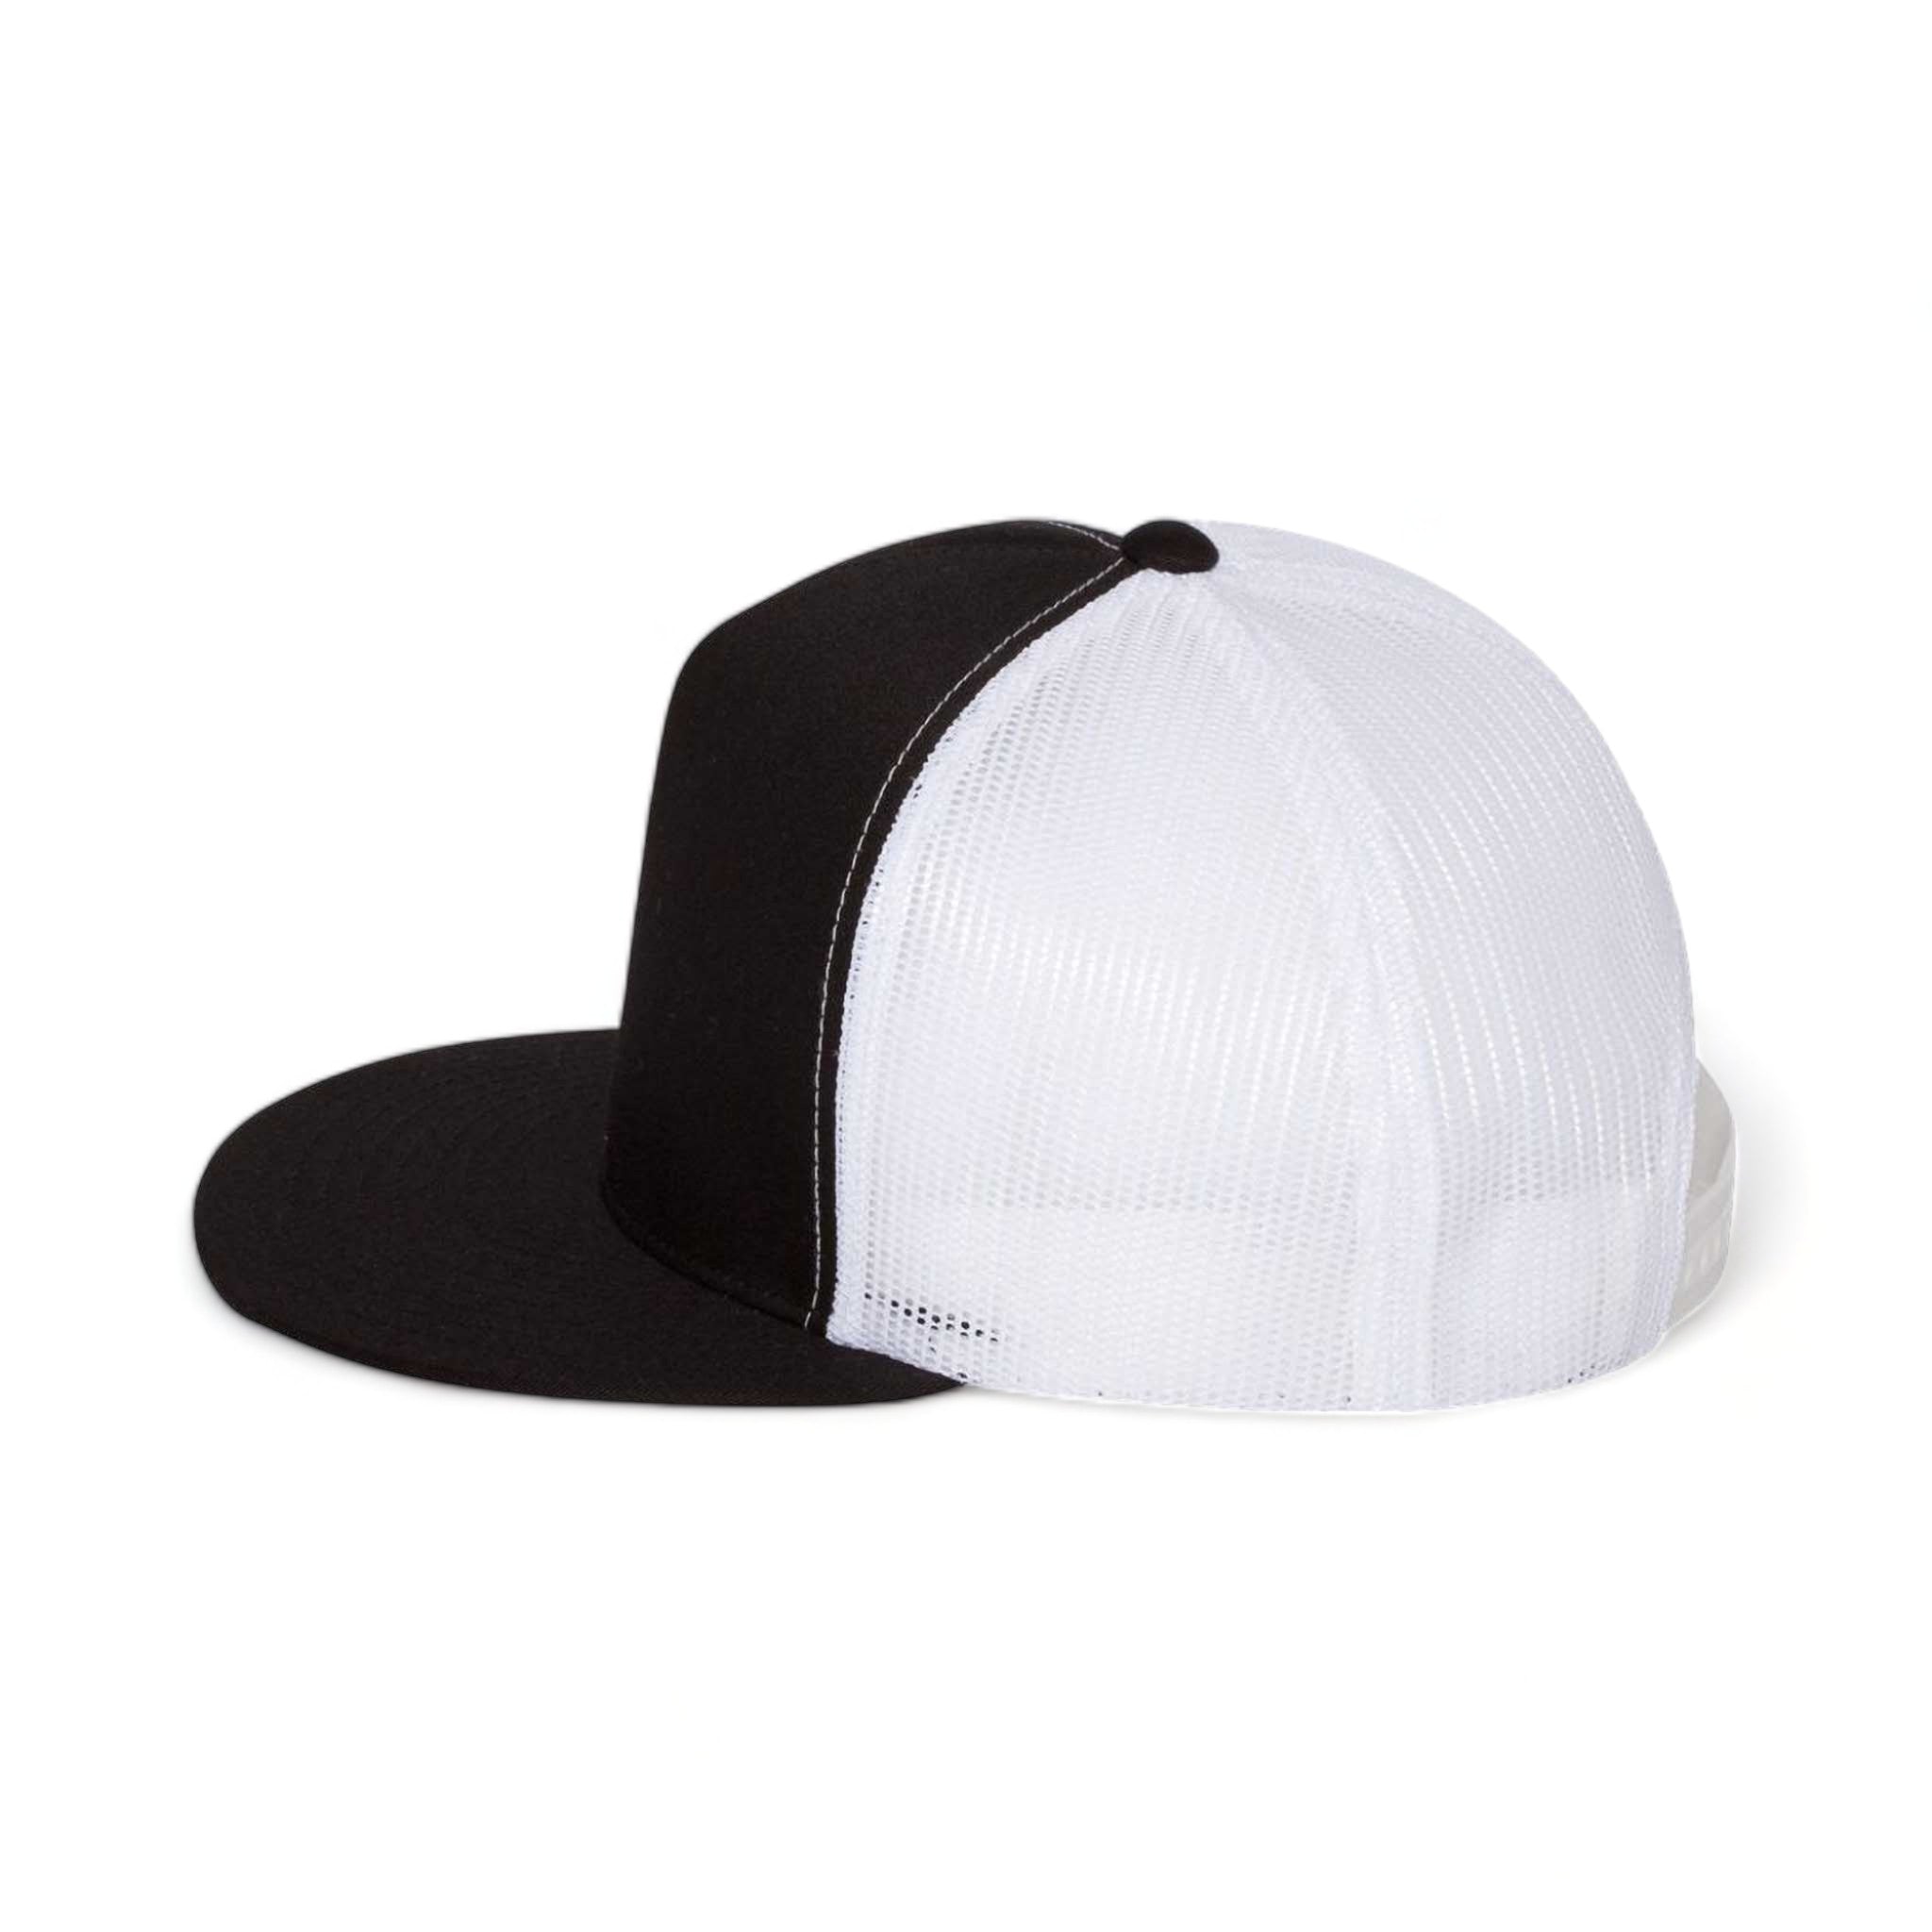 Side view of YP Classics 6006 custom hat in black and white